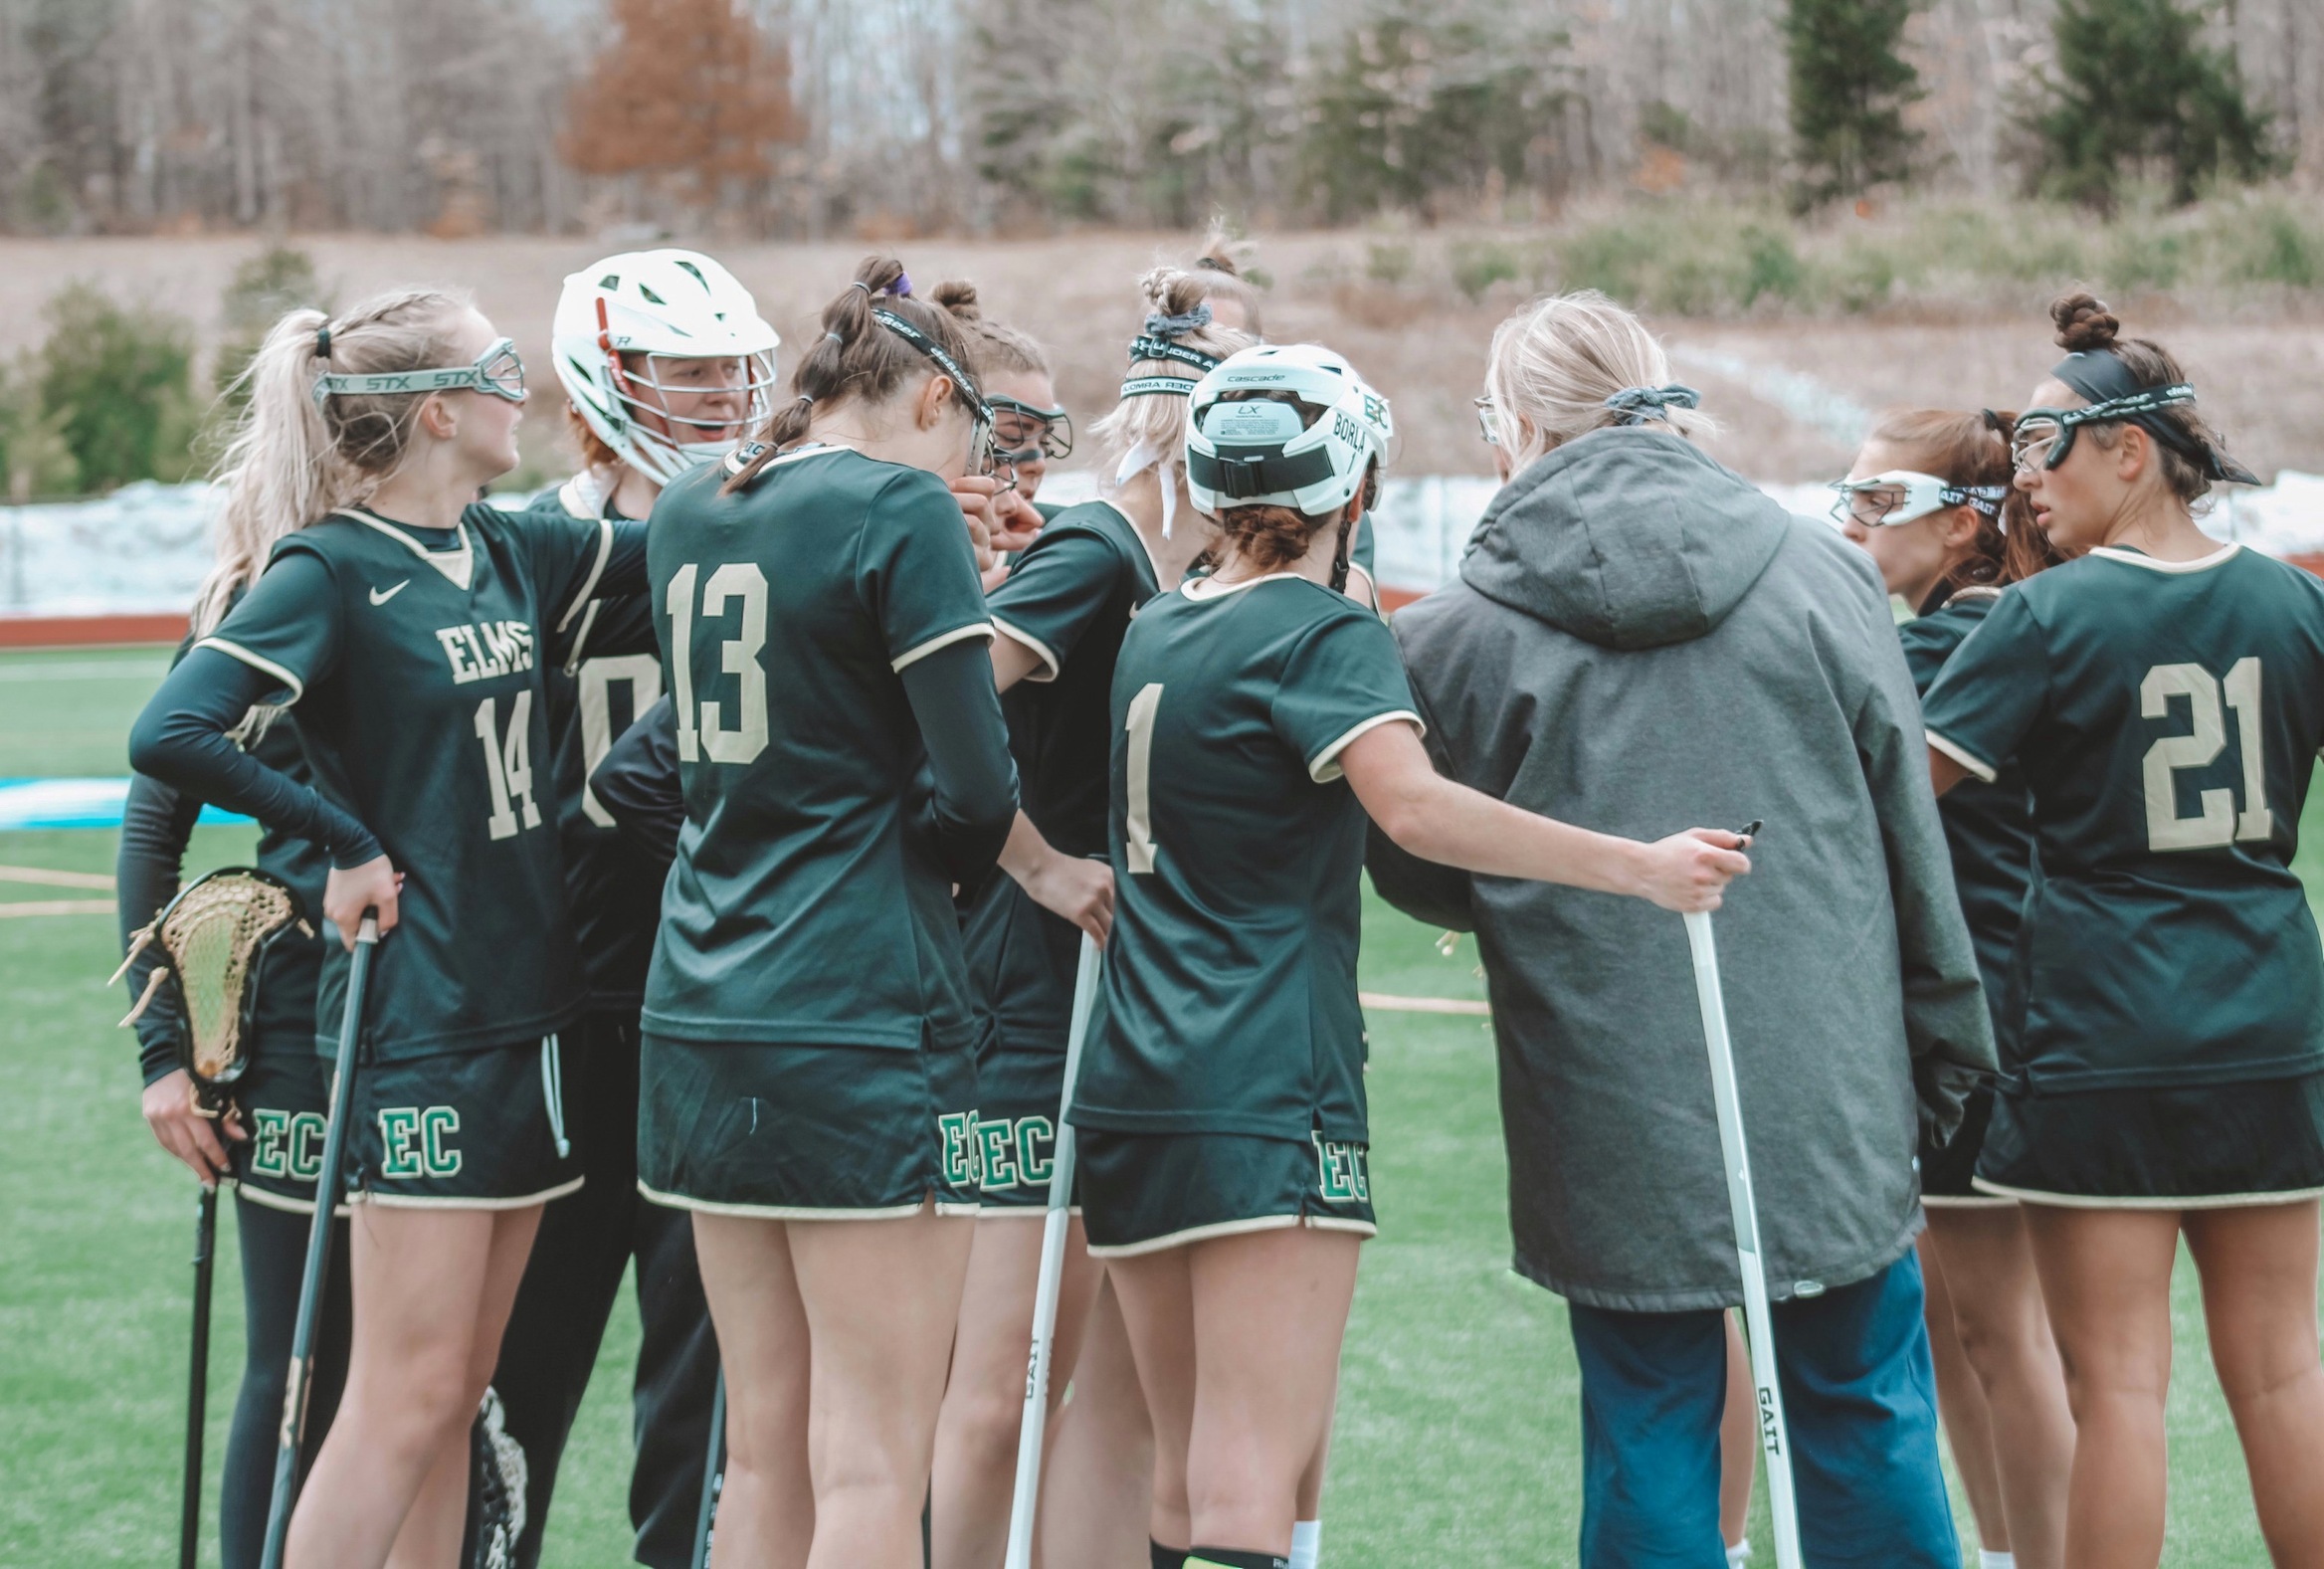 WLAX Falls to Chargers